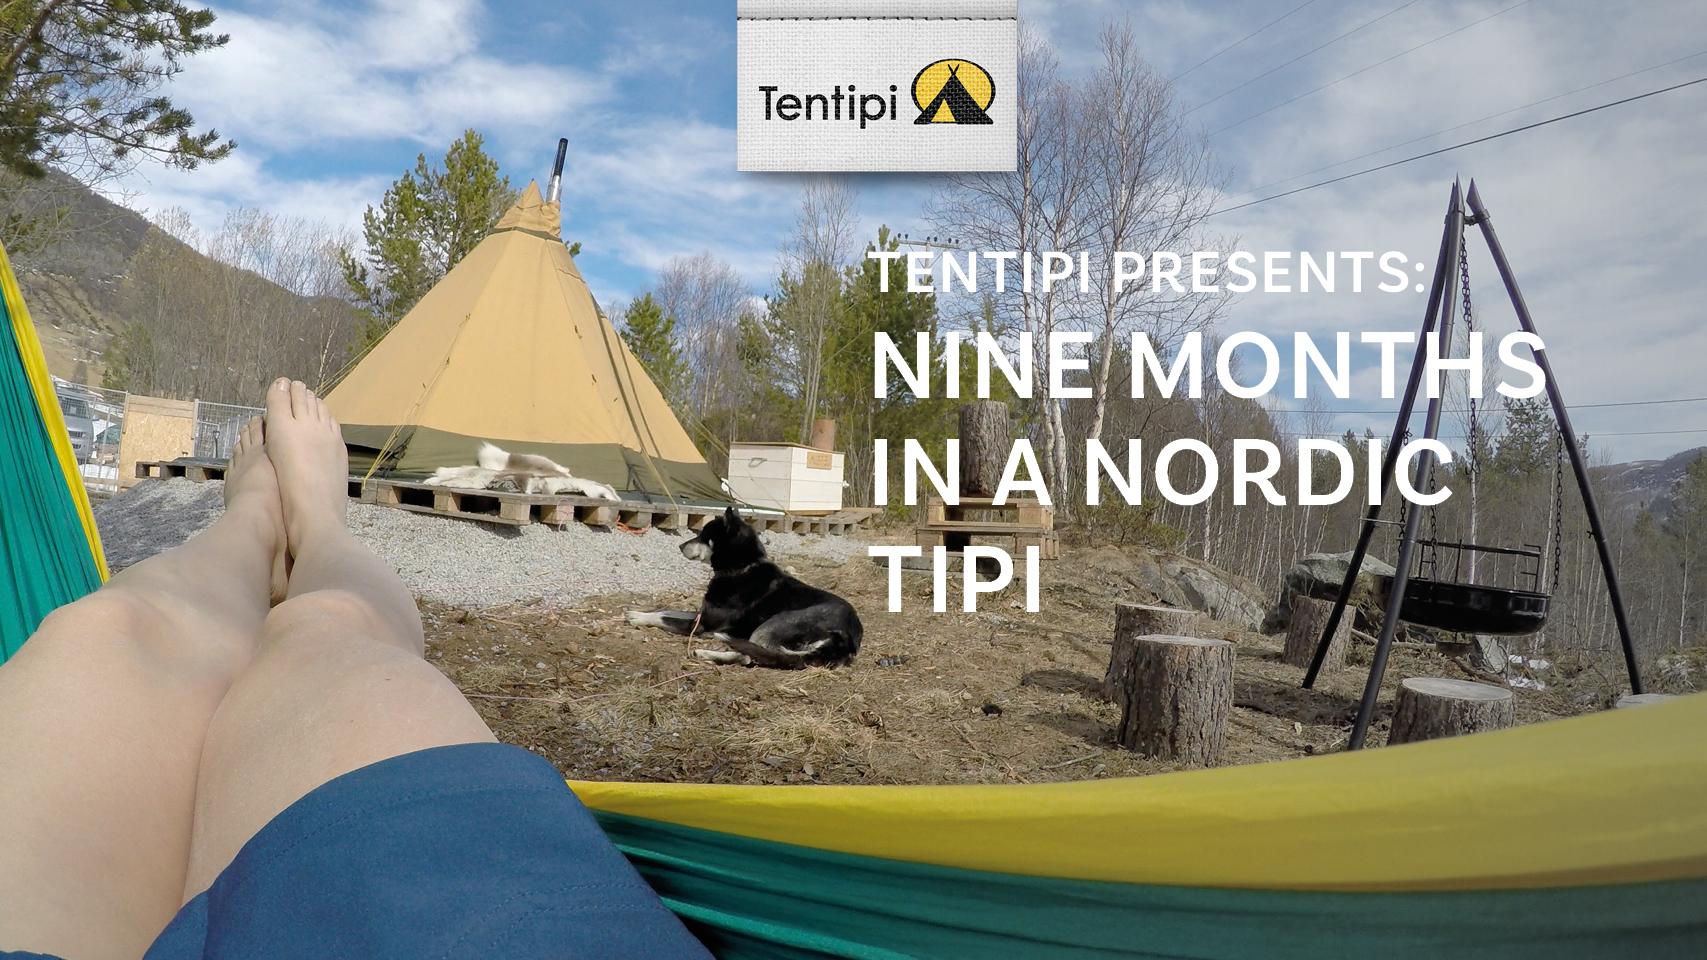 VIDEO Hanne- 9 months in a tipi thumb.jpg